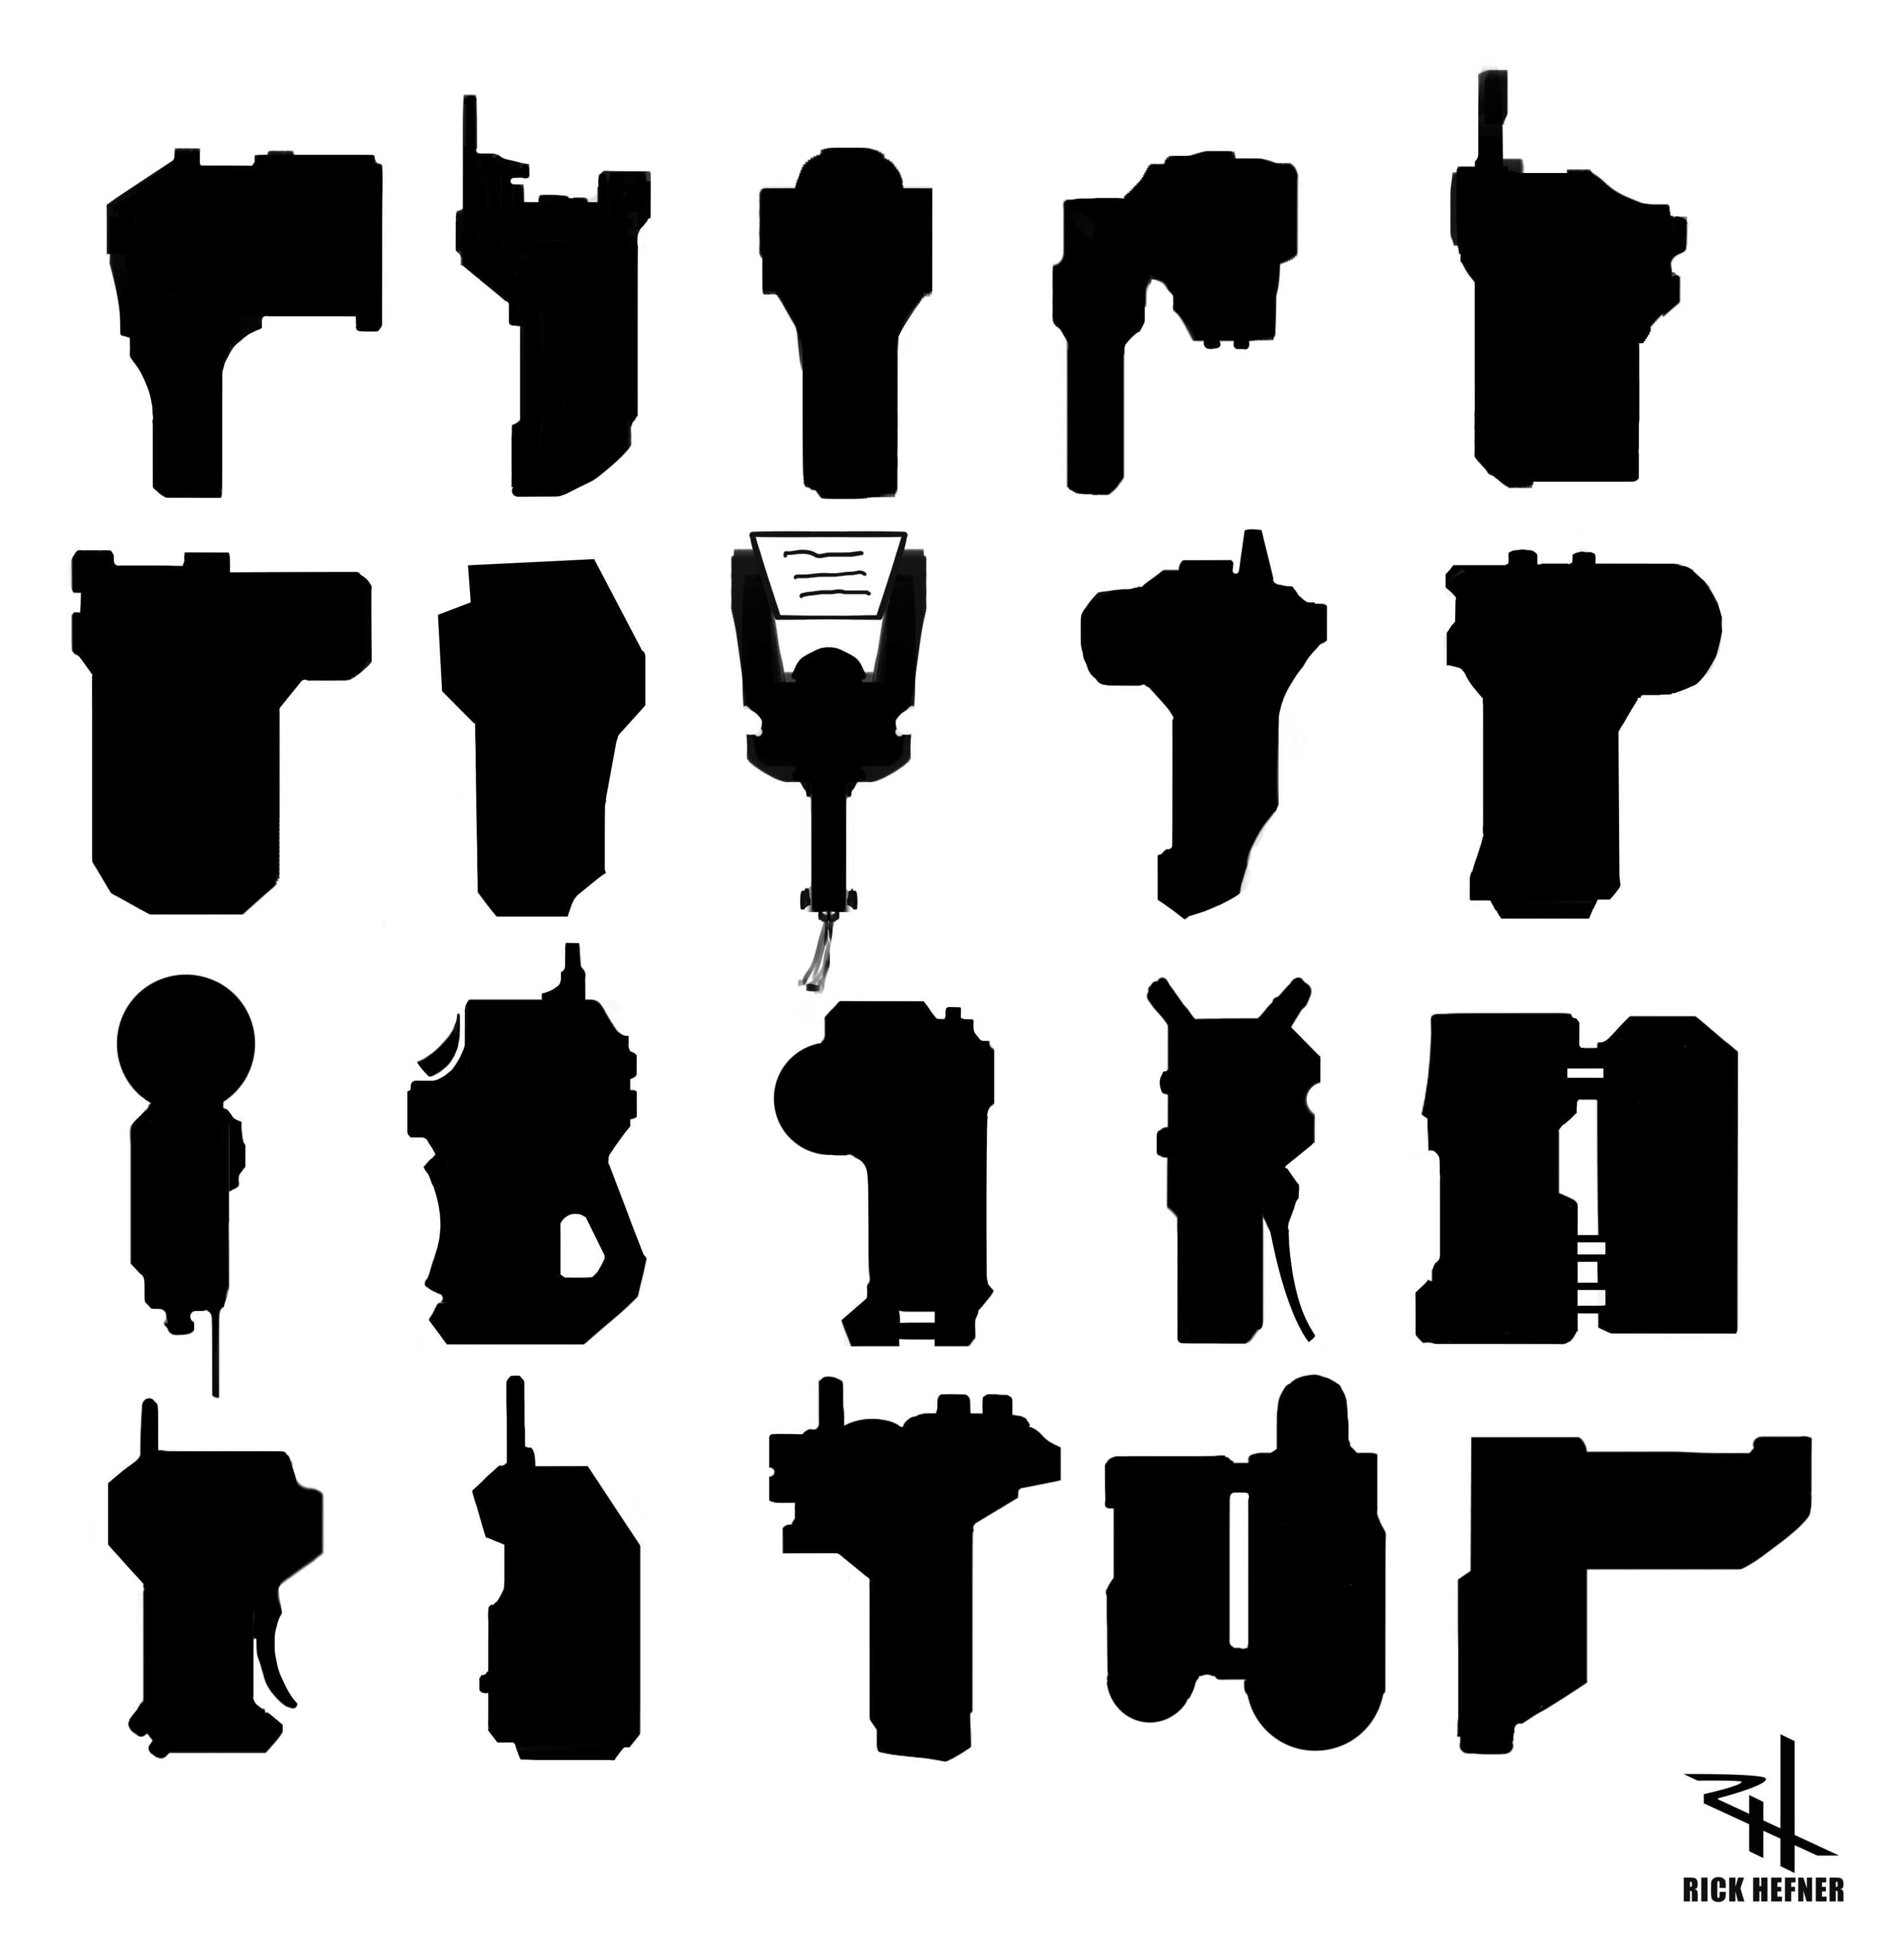 Started the process with 20 silhouettes of the device in frontal view.